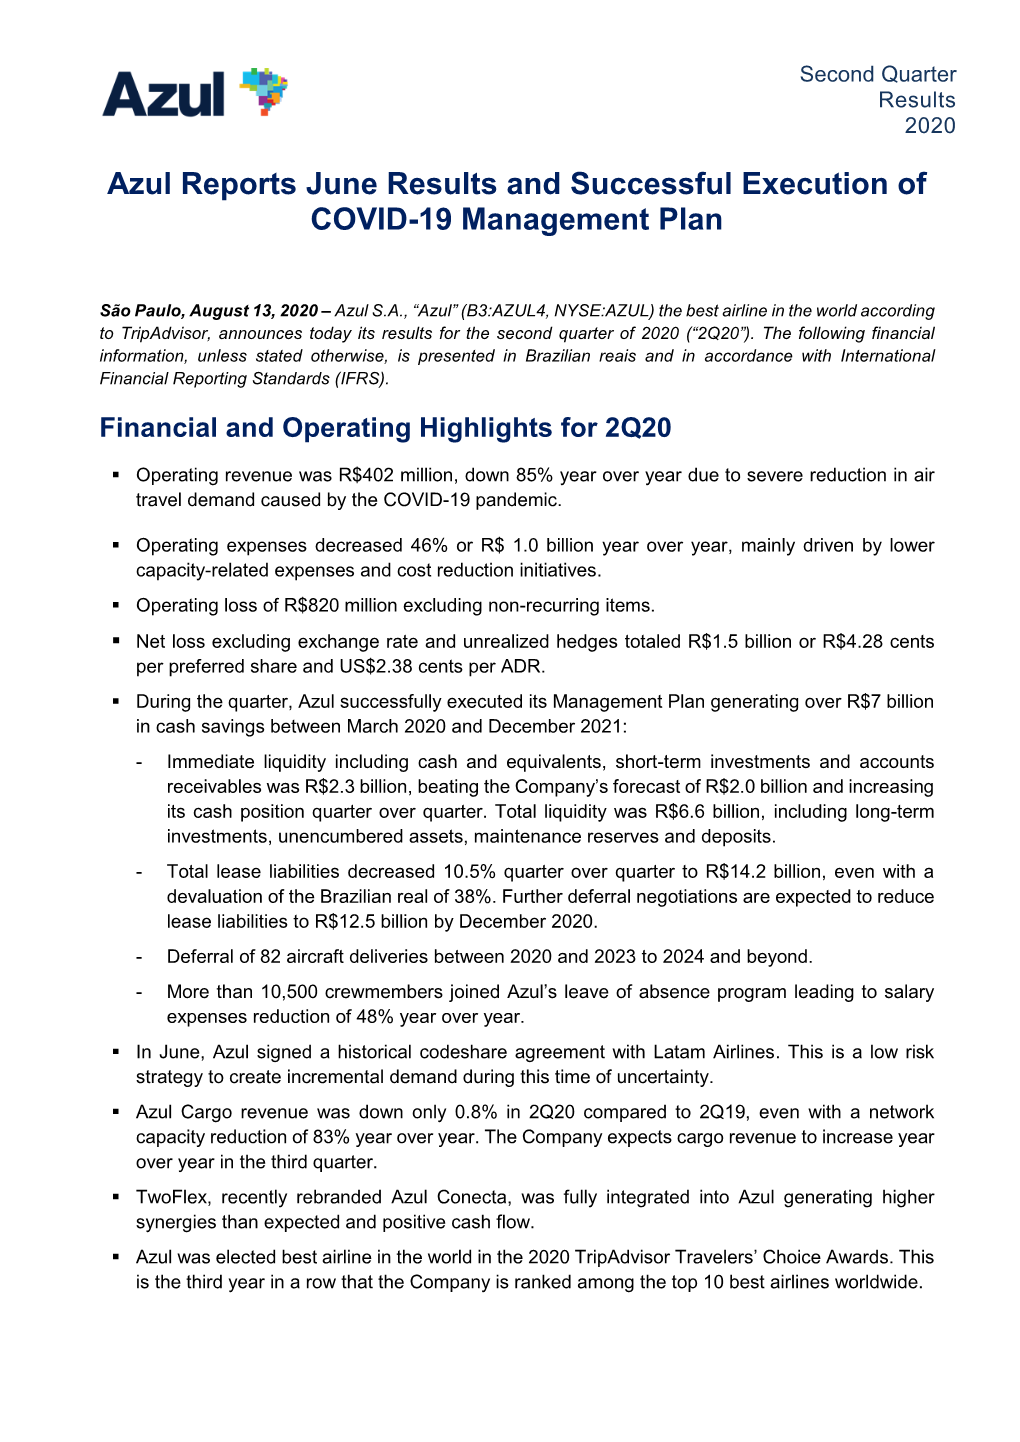 Azul Reports June Results and Successful Execution of COVID-19 Management Plan